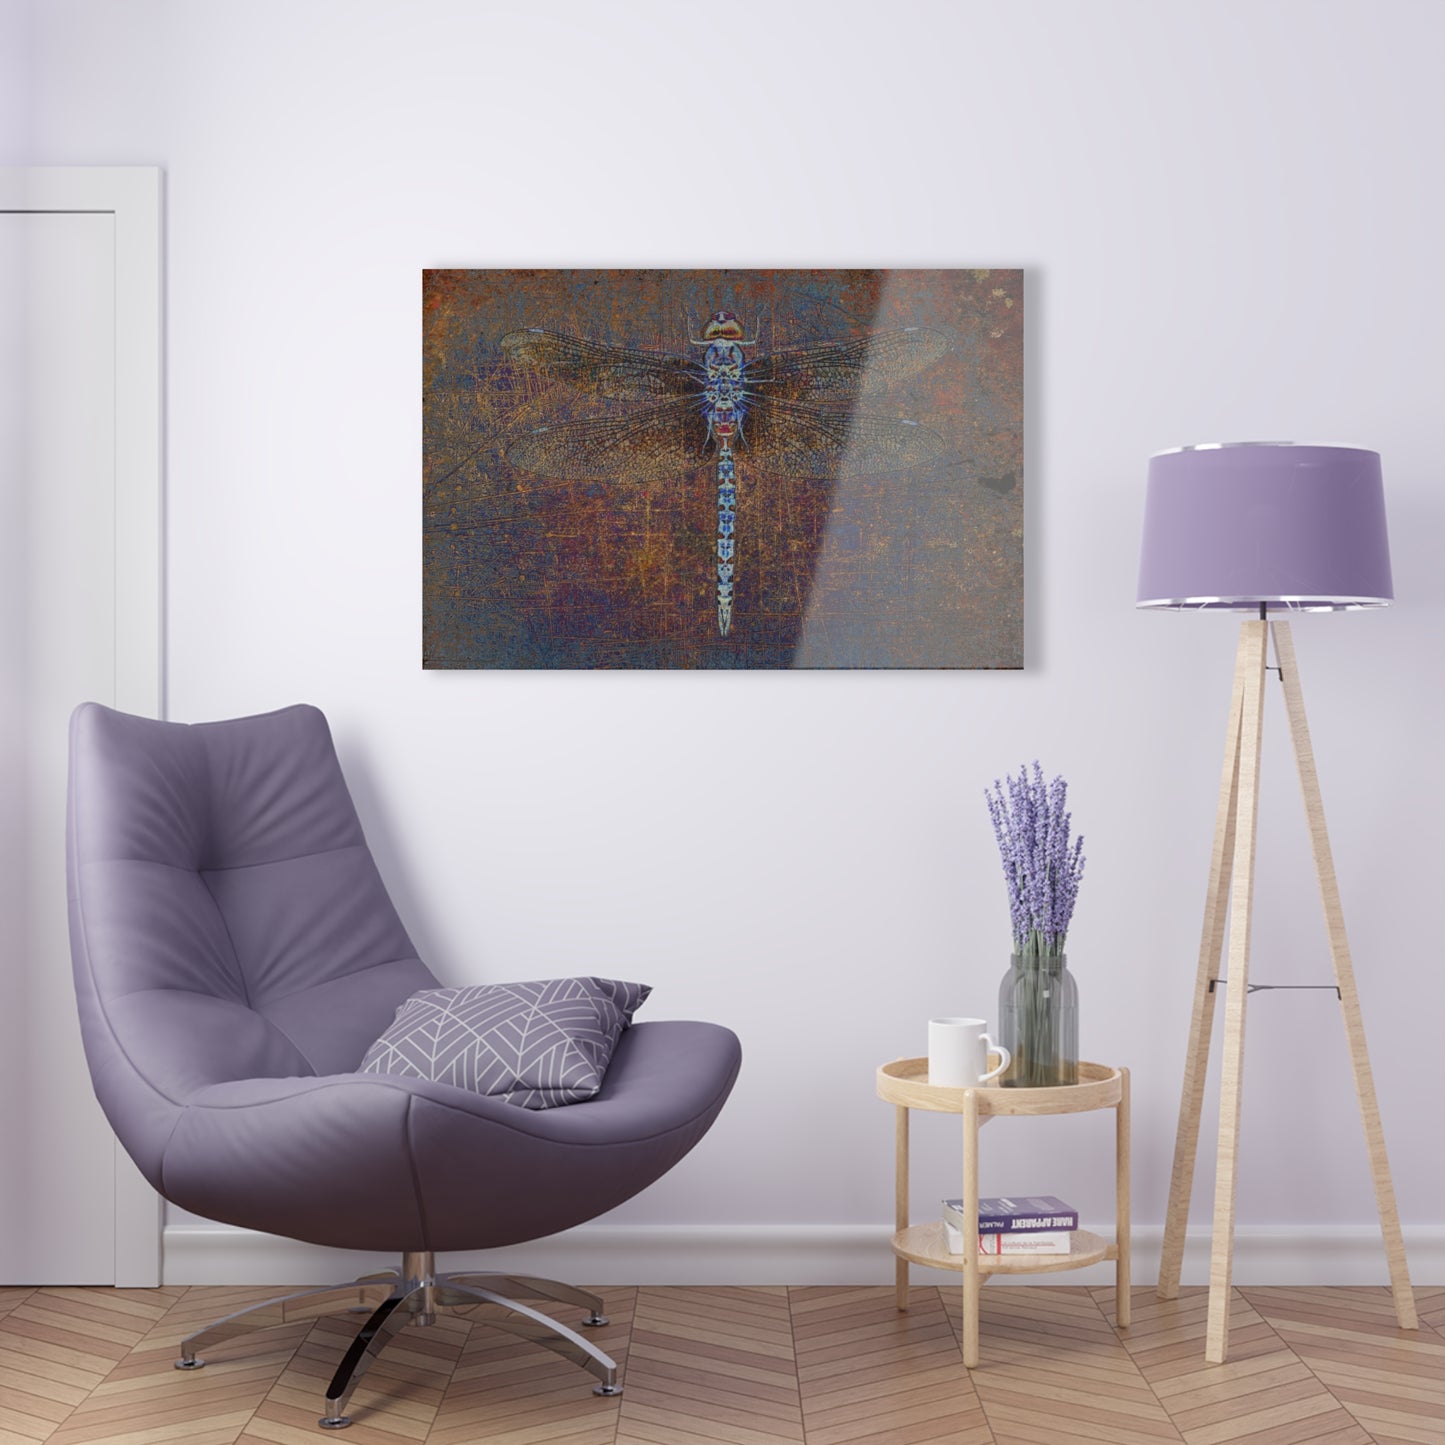 Dragonfly on Distressed Purple and Orange Background Print on a Crystal Clear Acrylic Panel 36x24 hung on white wall